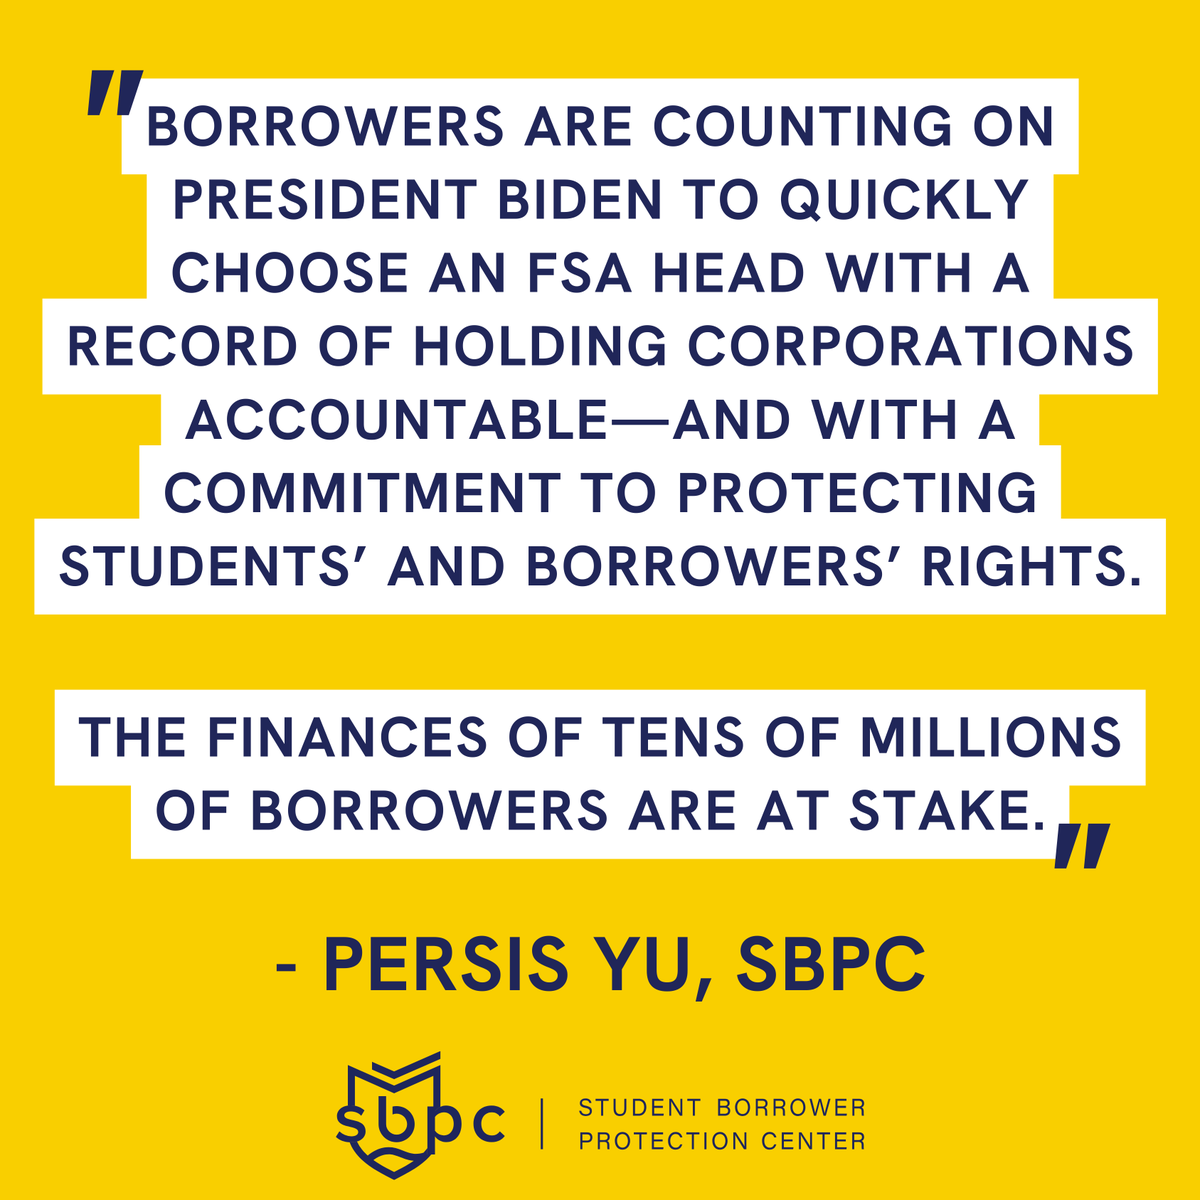 'Borrowers are counting on @POTUS to quickly choose a FSA head with a record of holding corporations accountable and with a commitment to protecting students’ and borrowers’ rights. The finances of tens of millions of borrowers are at stake.” -@YuPersis protectborrowers.org/advocates-reac…